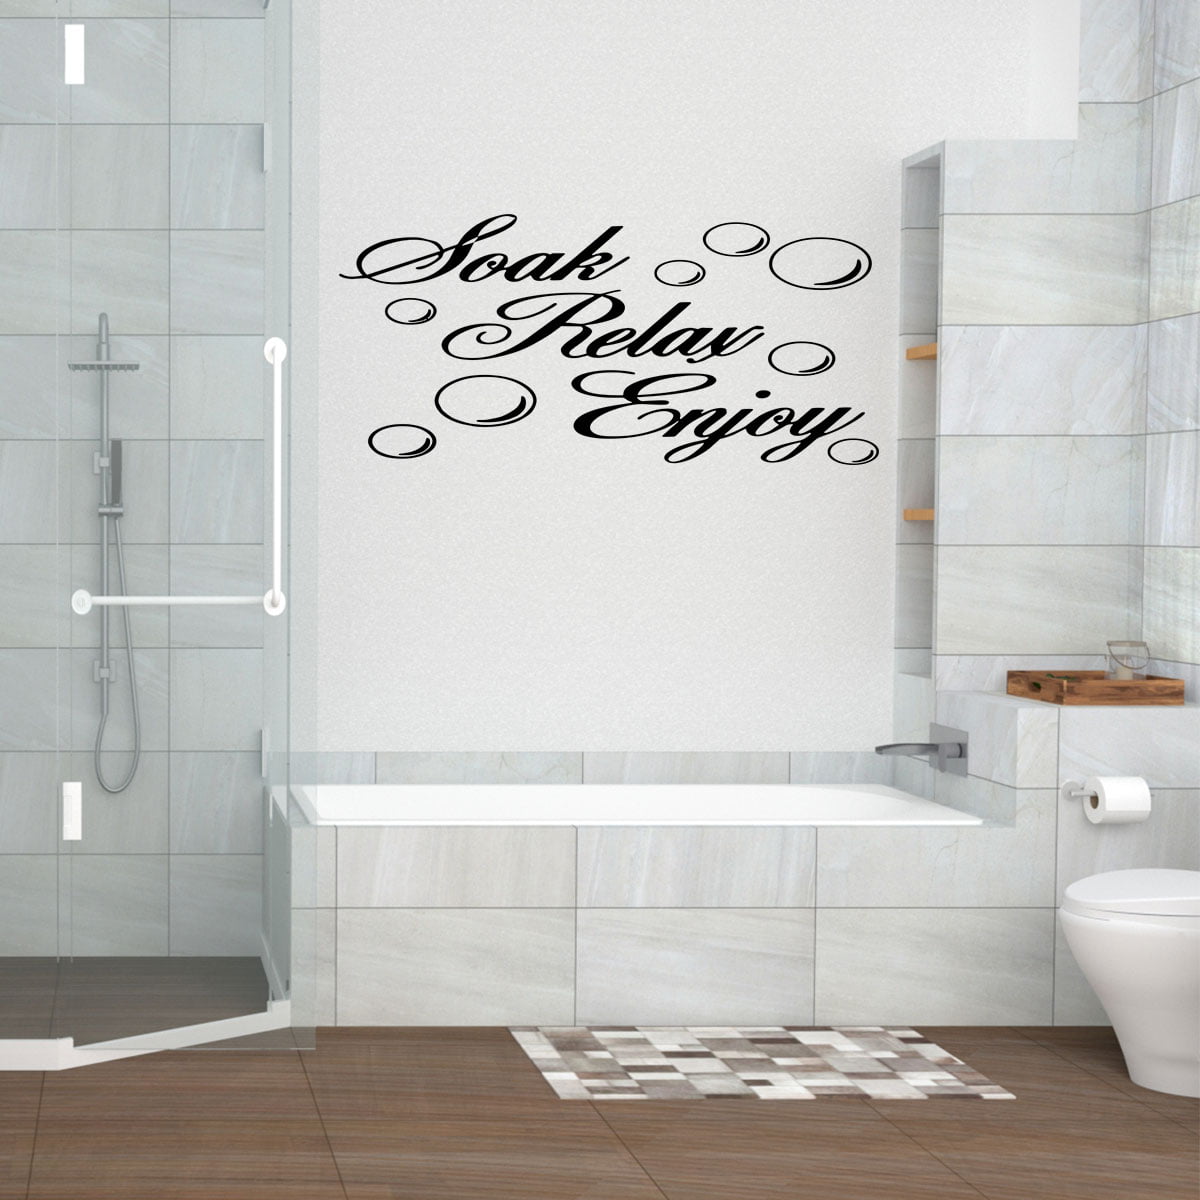 Relax Chillout Unwind Motto Quote Bathroom Shower Decal Wall Art Sticker Picture 